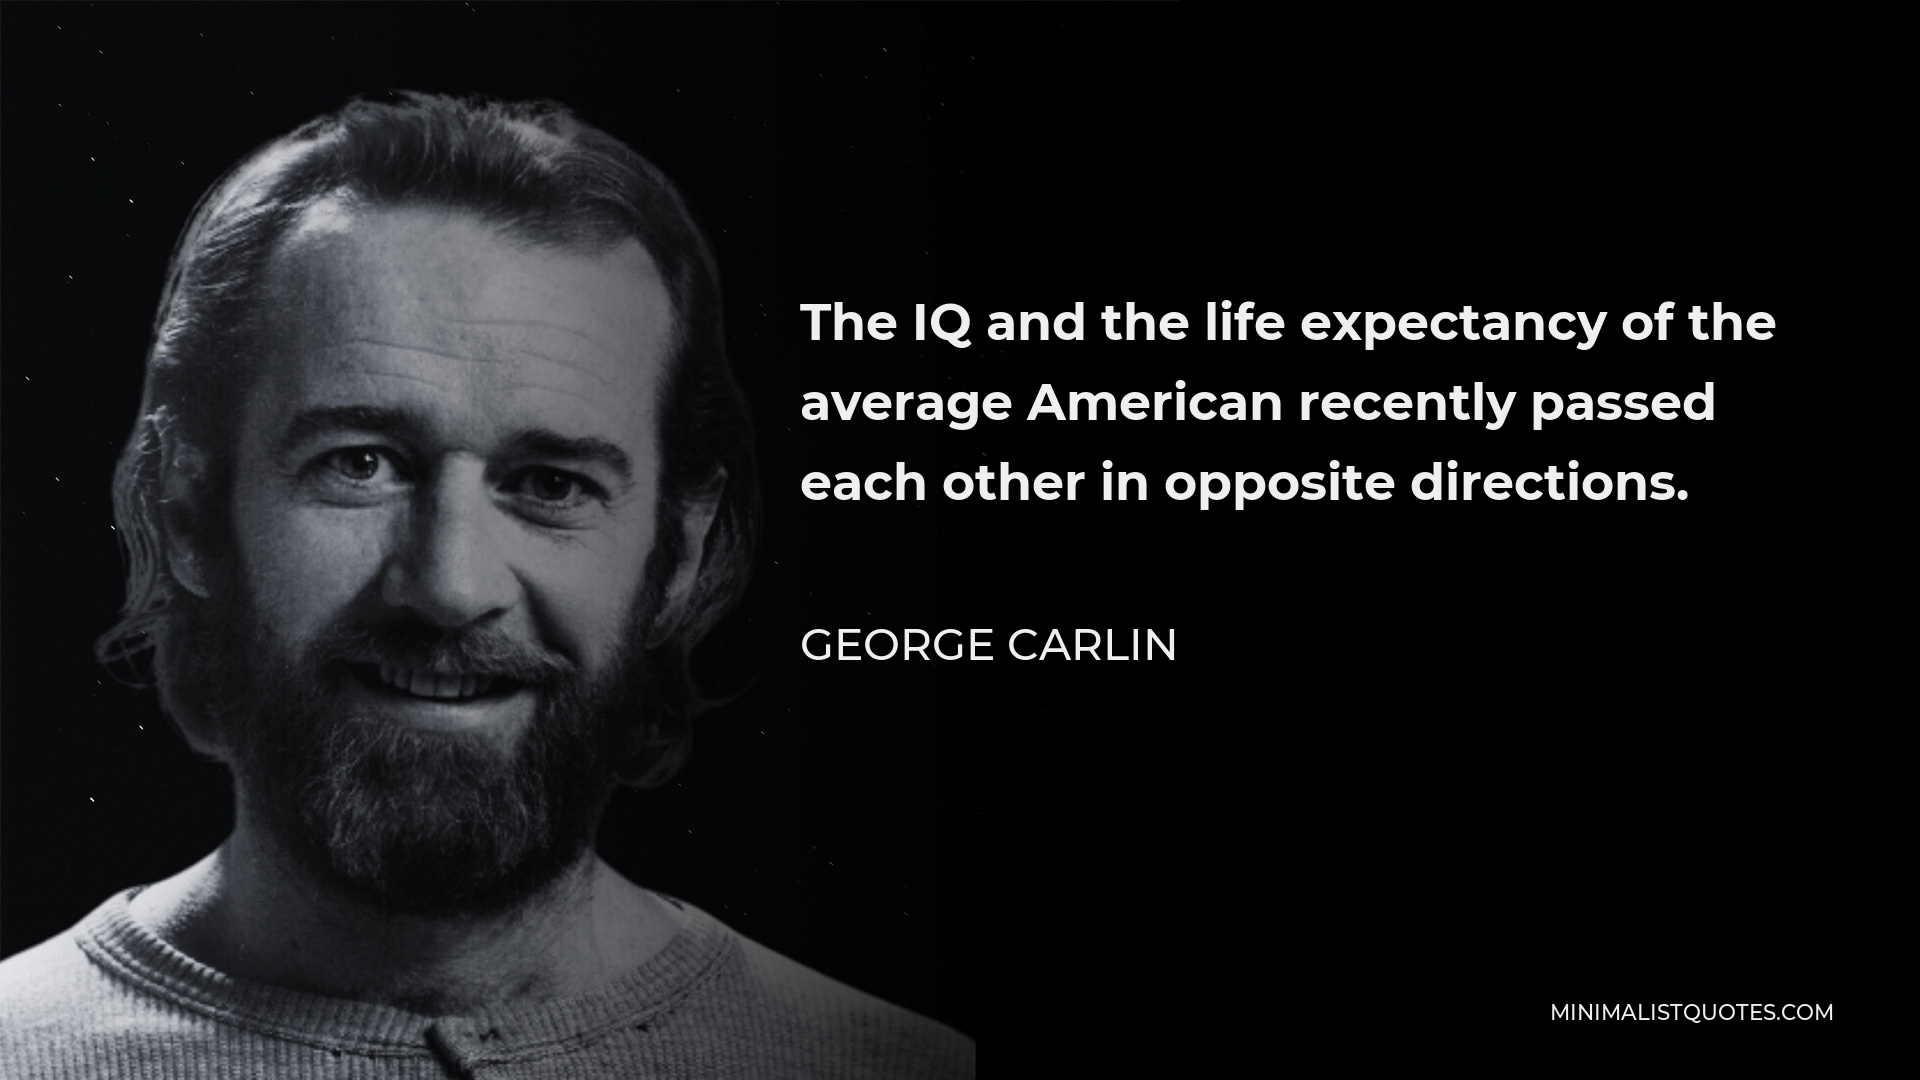 George Carlin Quote - The IQ and the life expectancy of the average American recently passed each other in opposite directions.